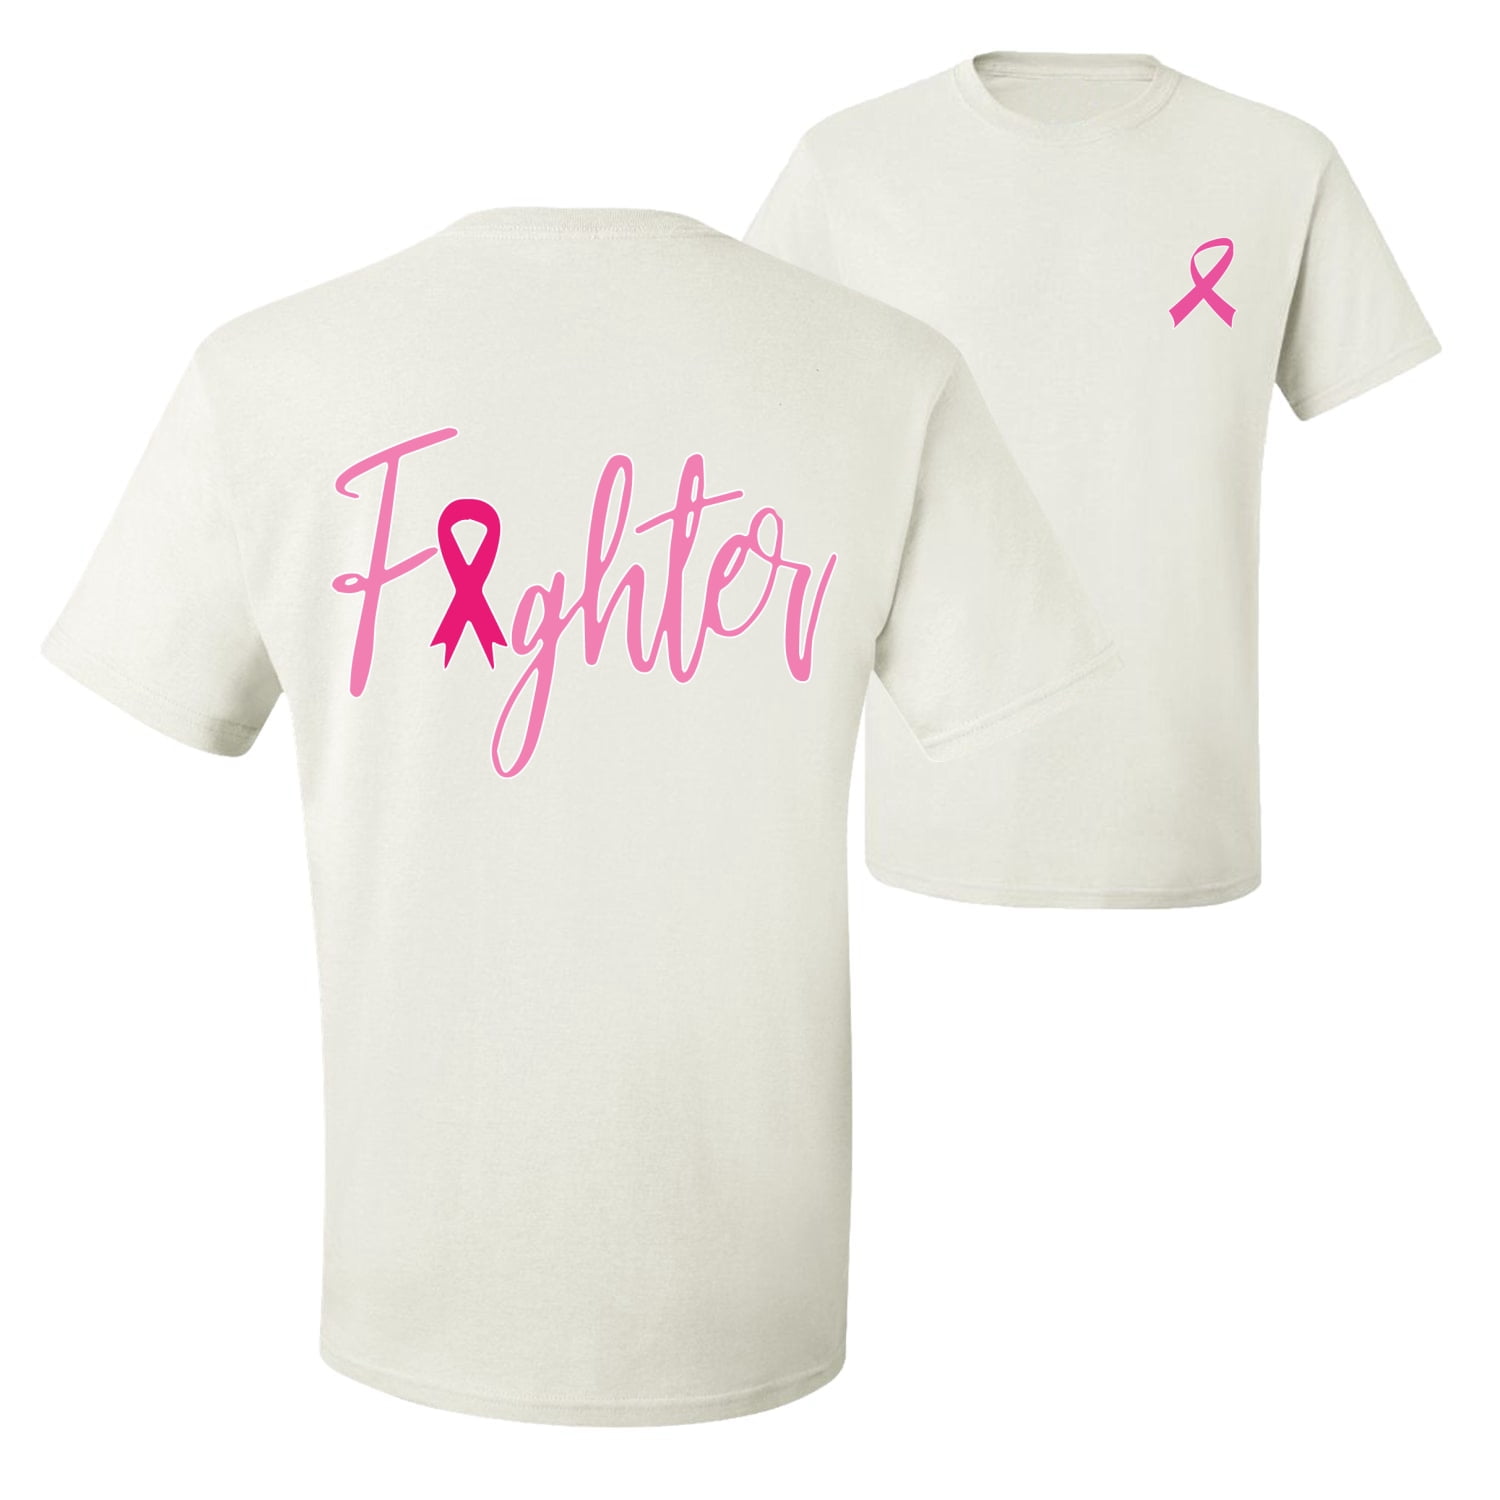 Xxxxxx Xxx Video Hd Watch Yong Sister - Wild Bobby, Fighter Breast Cancer Survivor, Breast Cancer Awareness, Front  and Back Men Graphic Tee, White, X-Large - Walmart.com